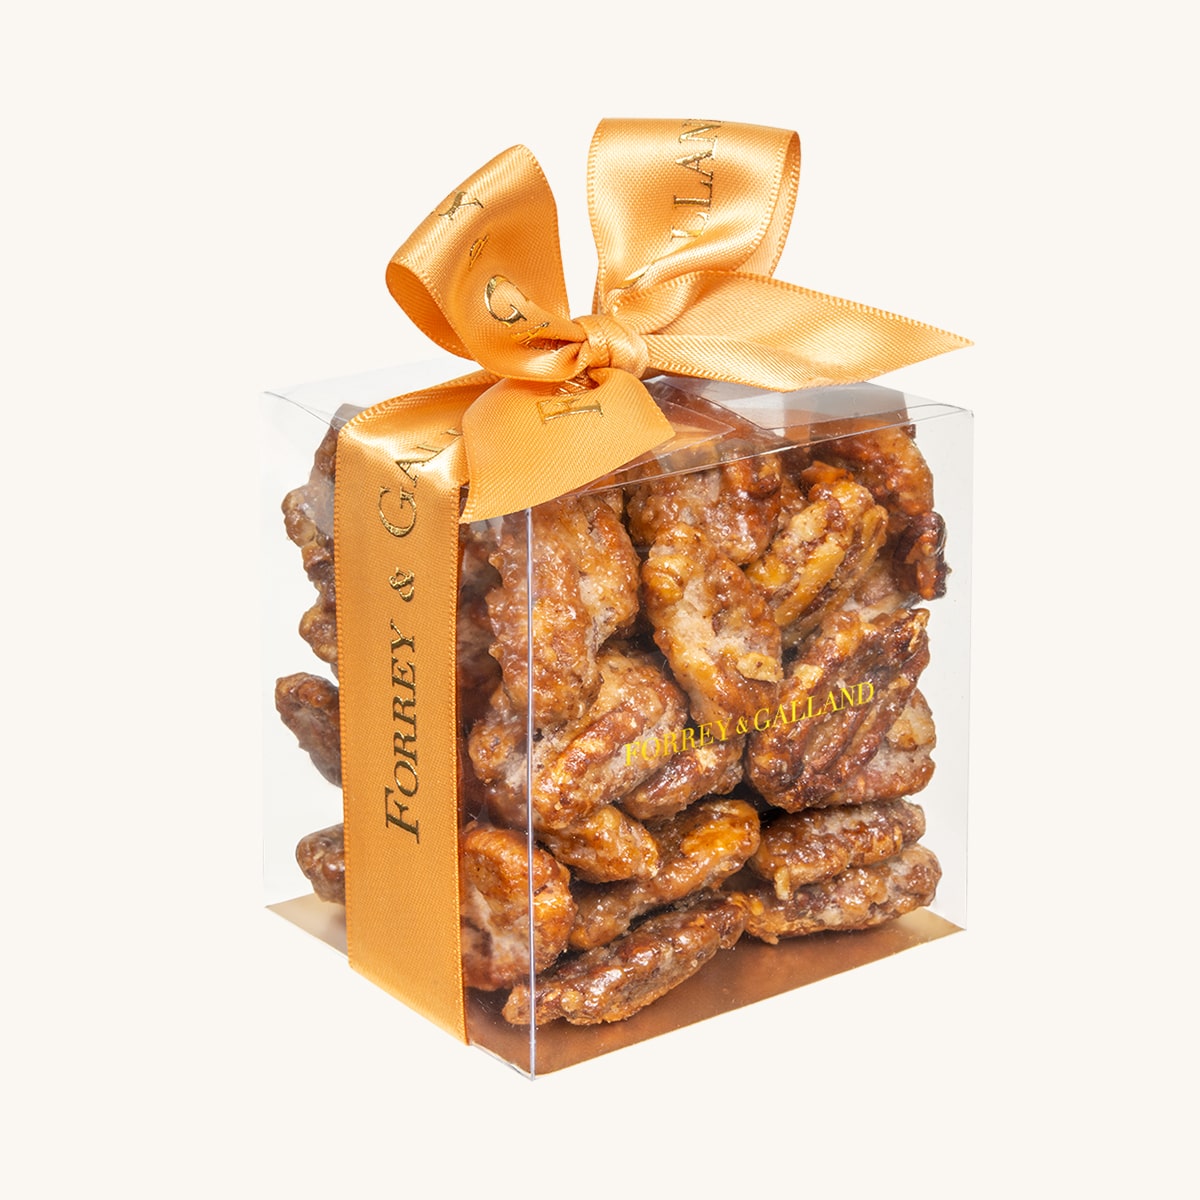 Online chocolate delivery in Dubai | Order Cookies, Cakes & Dates UAE